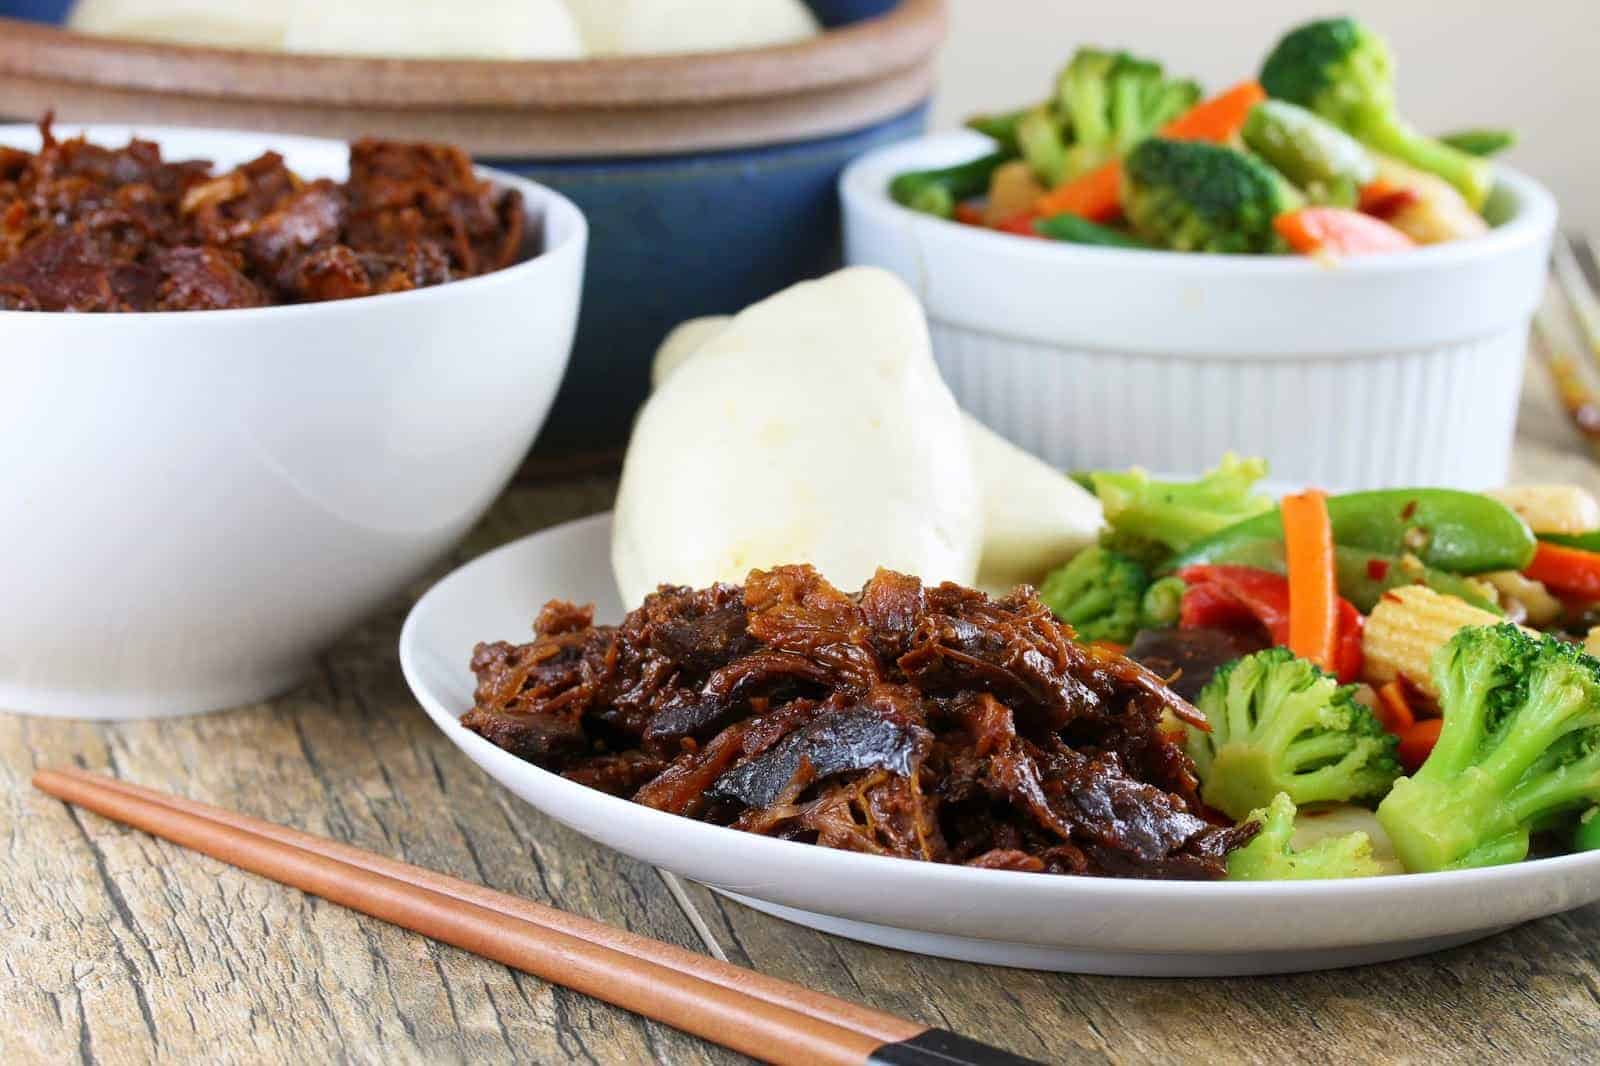 Slow cooker shinese bbq pork on a white plate with veggies and rolls.